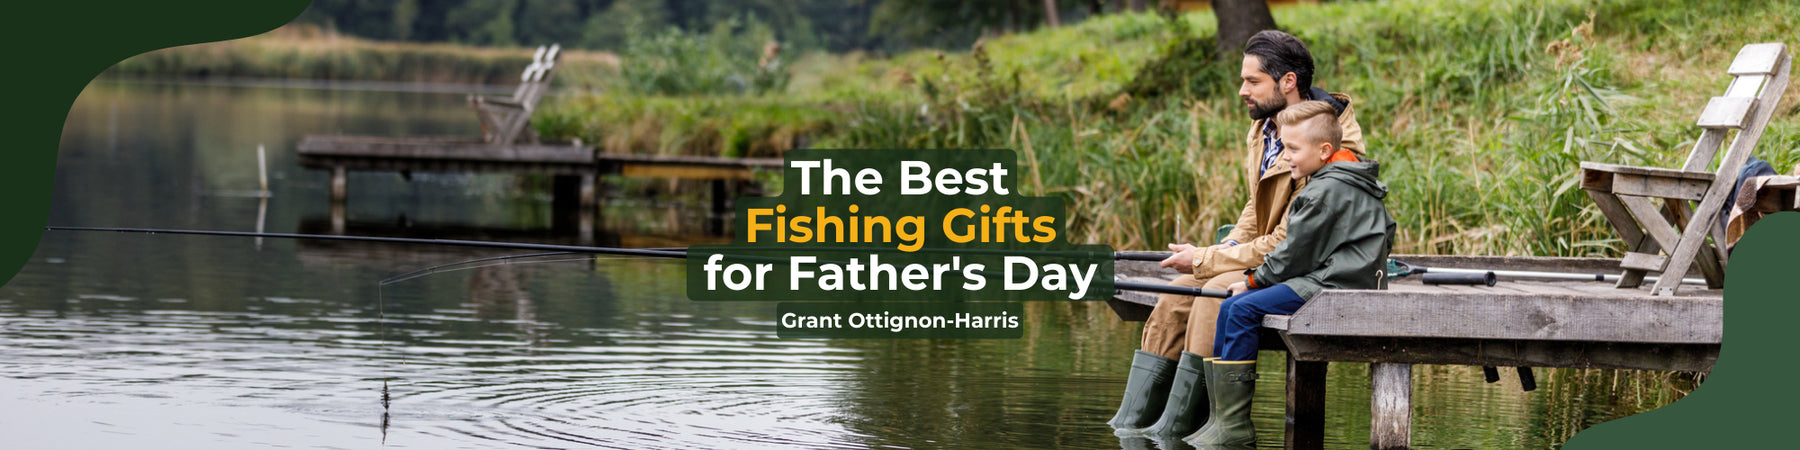 Father's Day gifts for your fishing obsessed dad